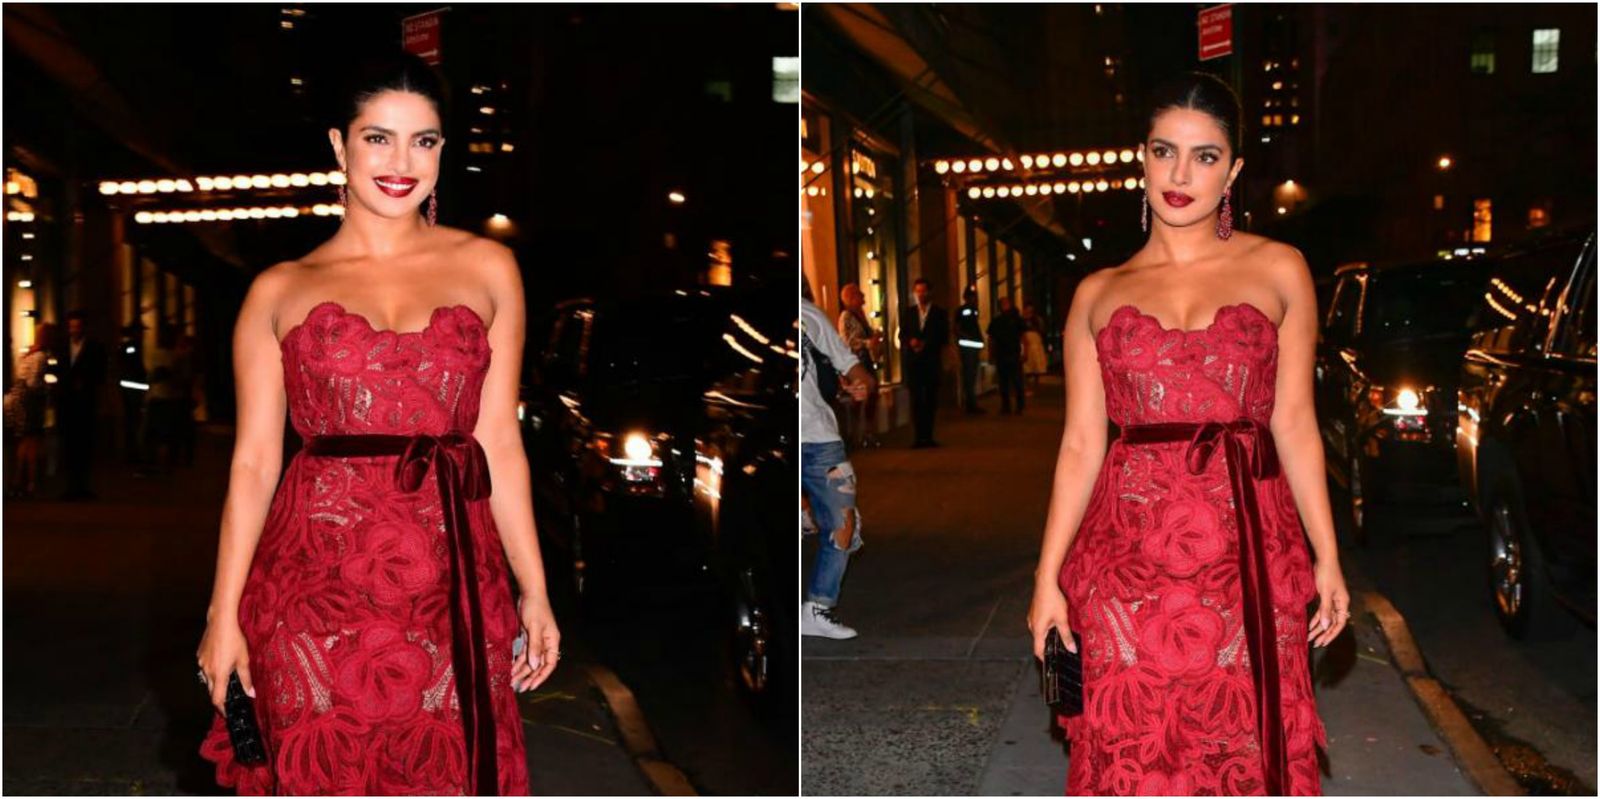 The Price Of Priyanka Chopra’s Gown At Vanity Fair Party Can Fetch You More Than 8 Latest i-Phones